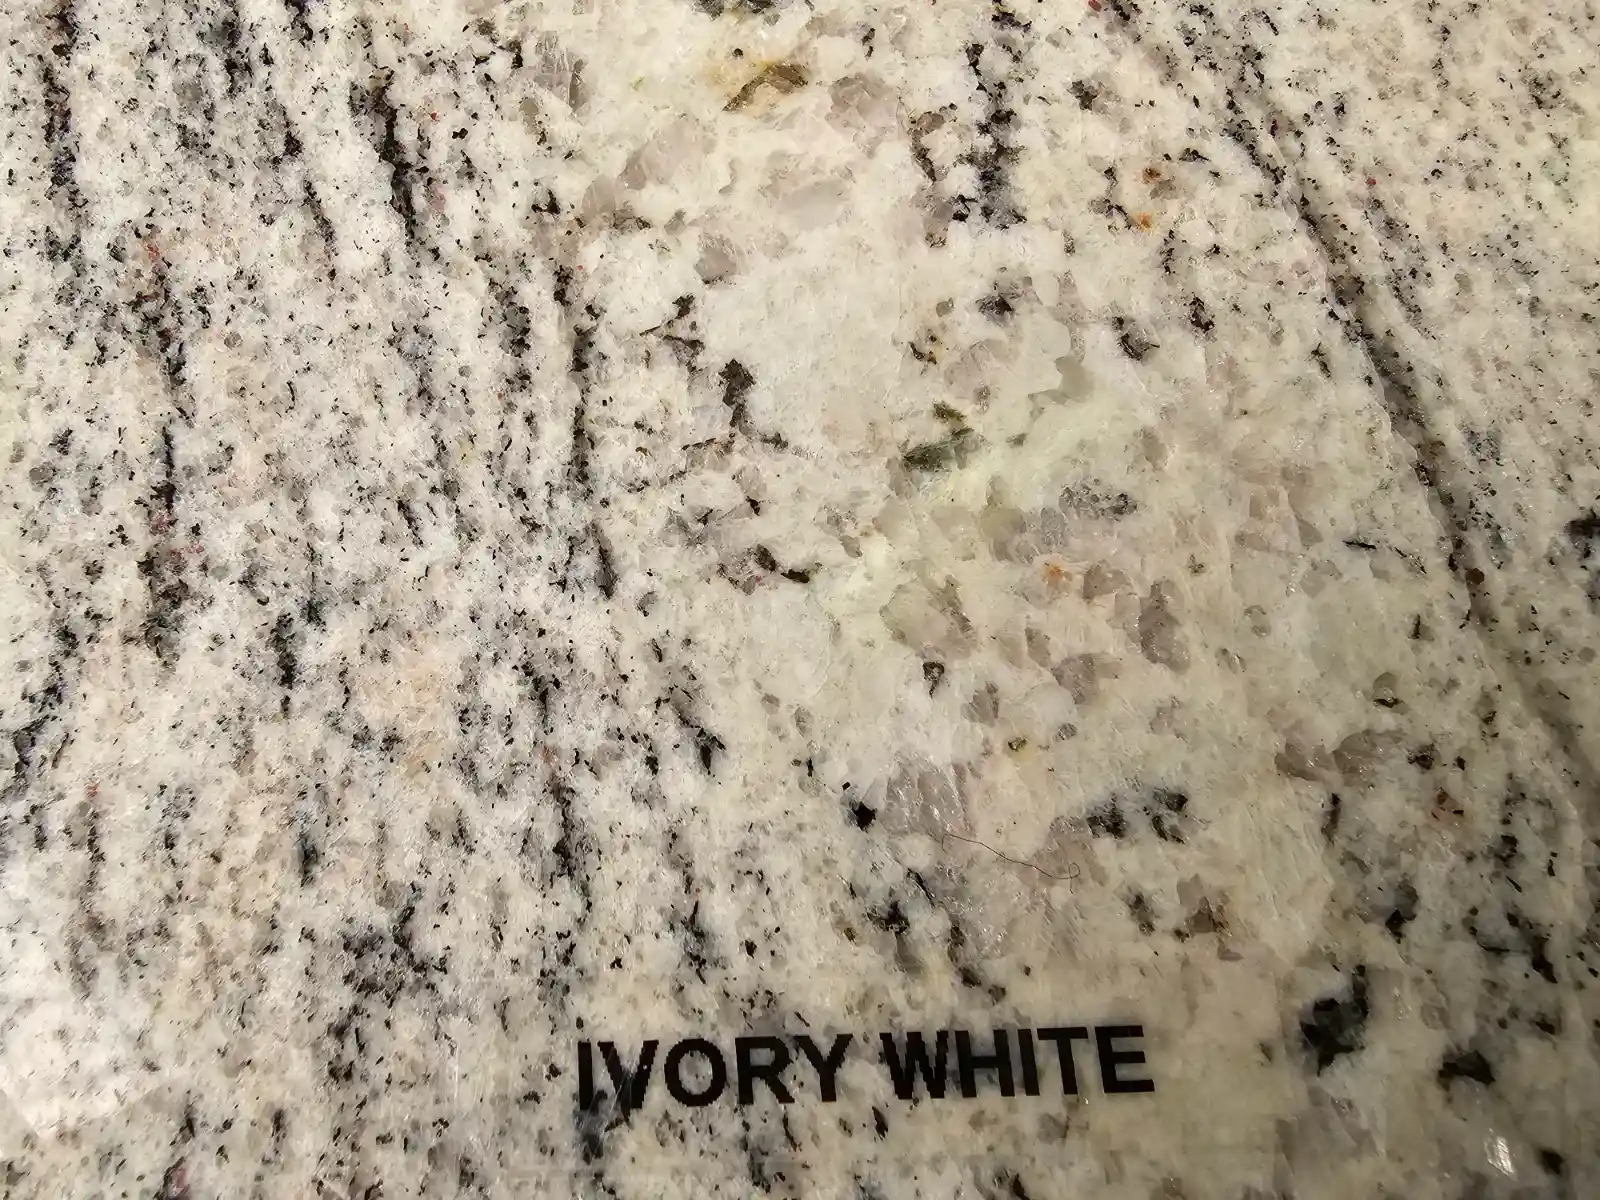 Ivory white granite countertop style and material